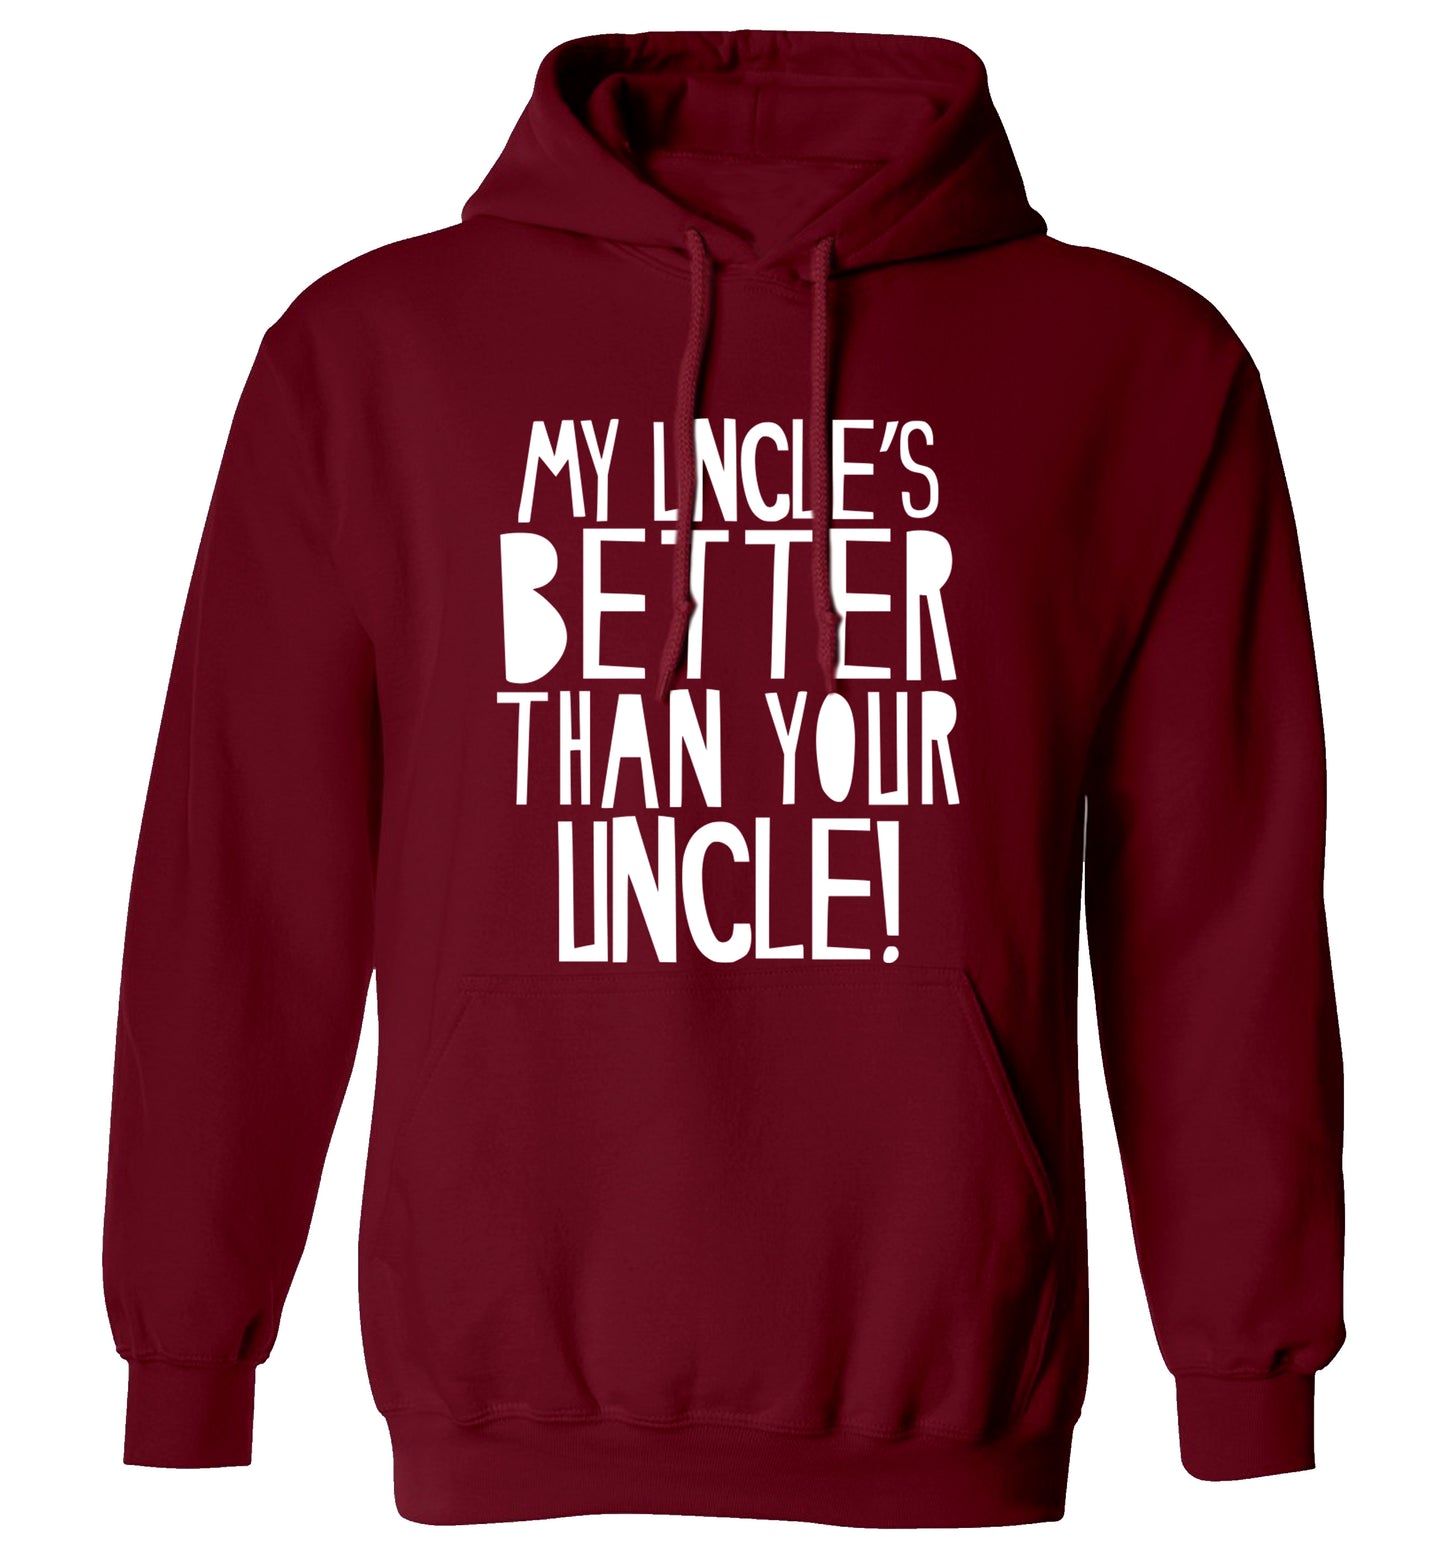 My uncles better than your uncle adults unisex maroon hoodie 2XL